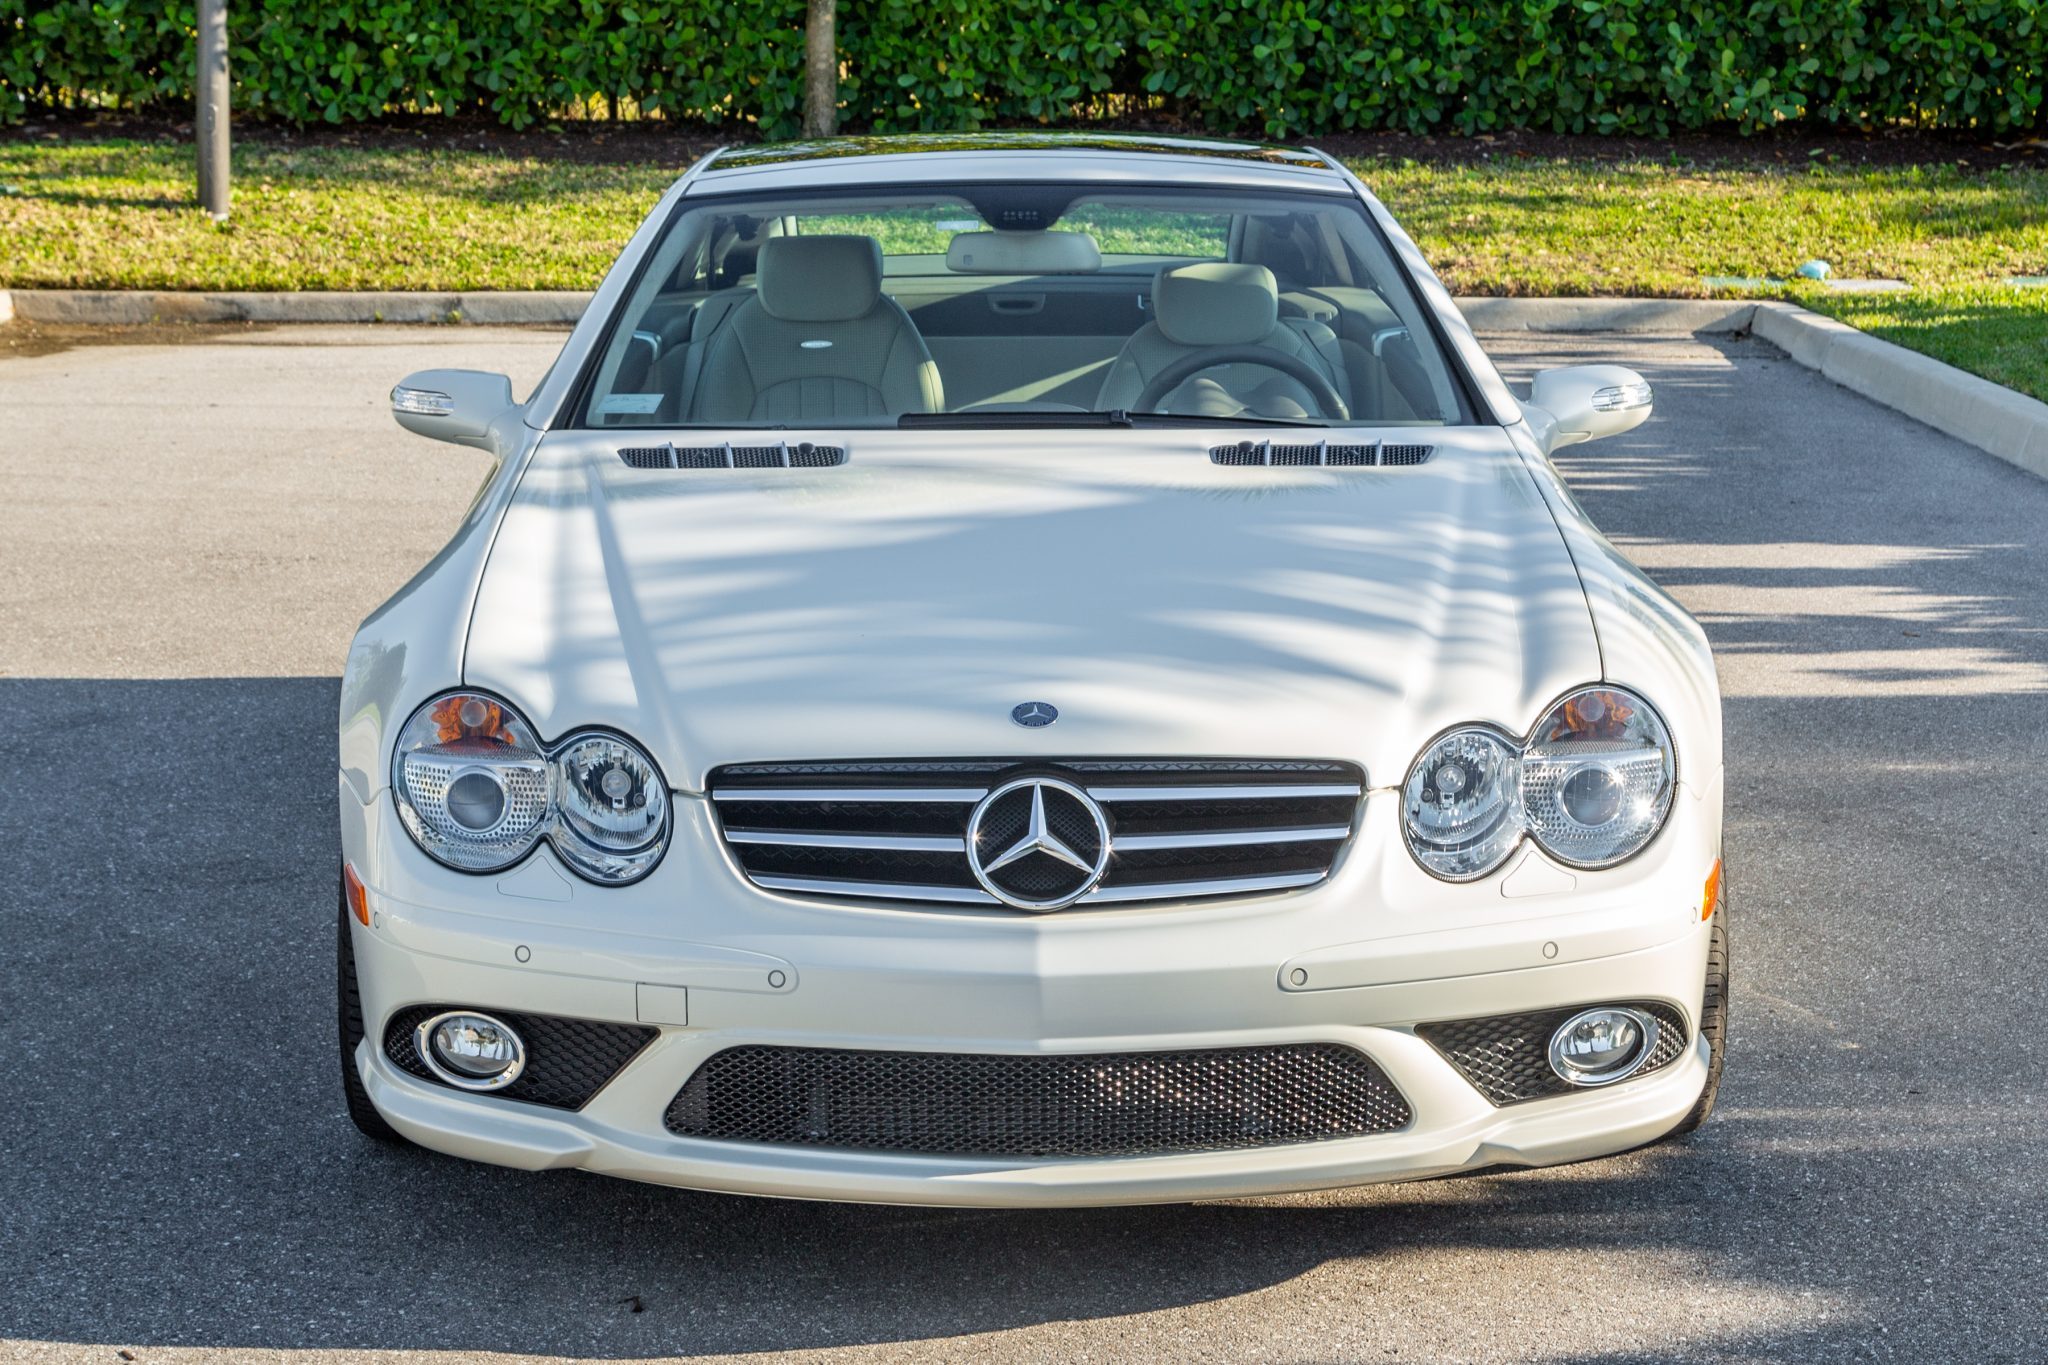 2007 Mercedes Benz Sl55 Amg Image Abyss